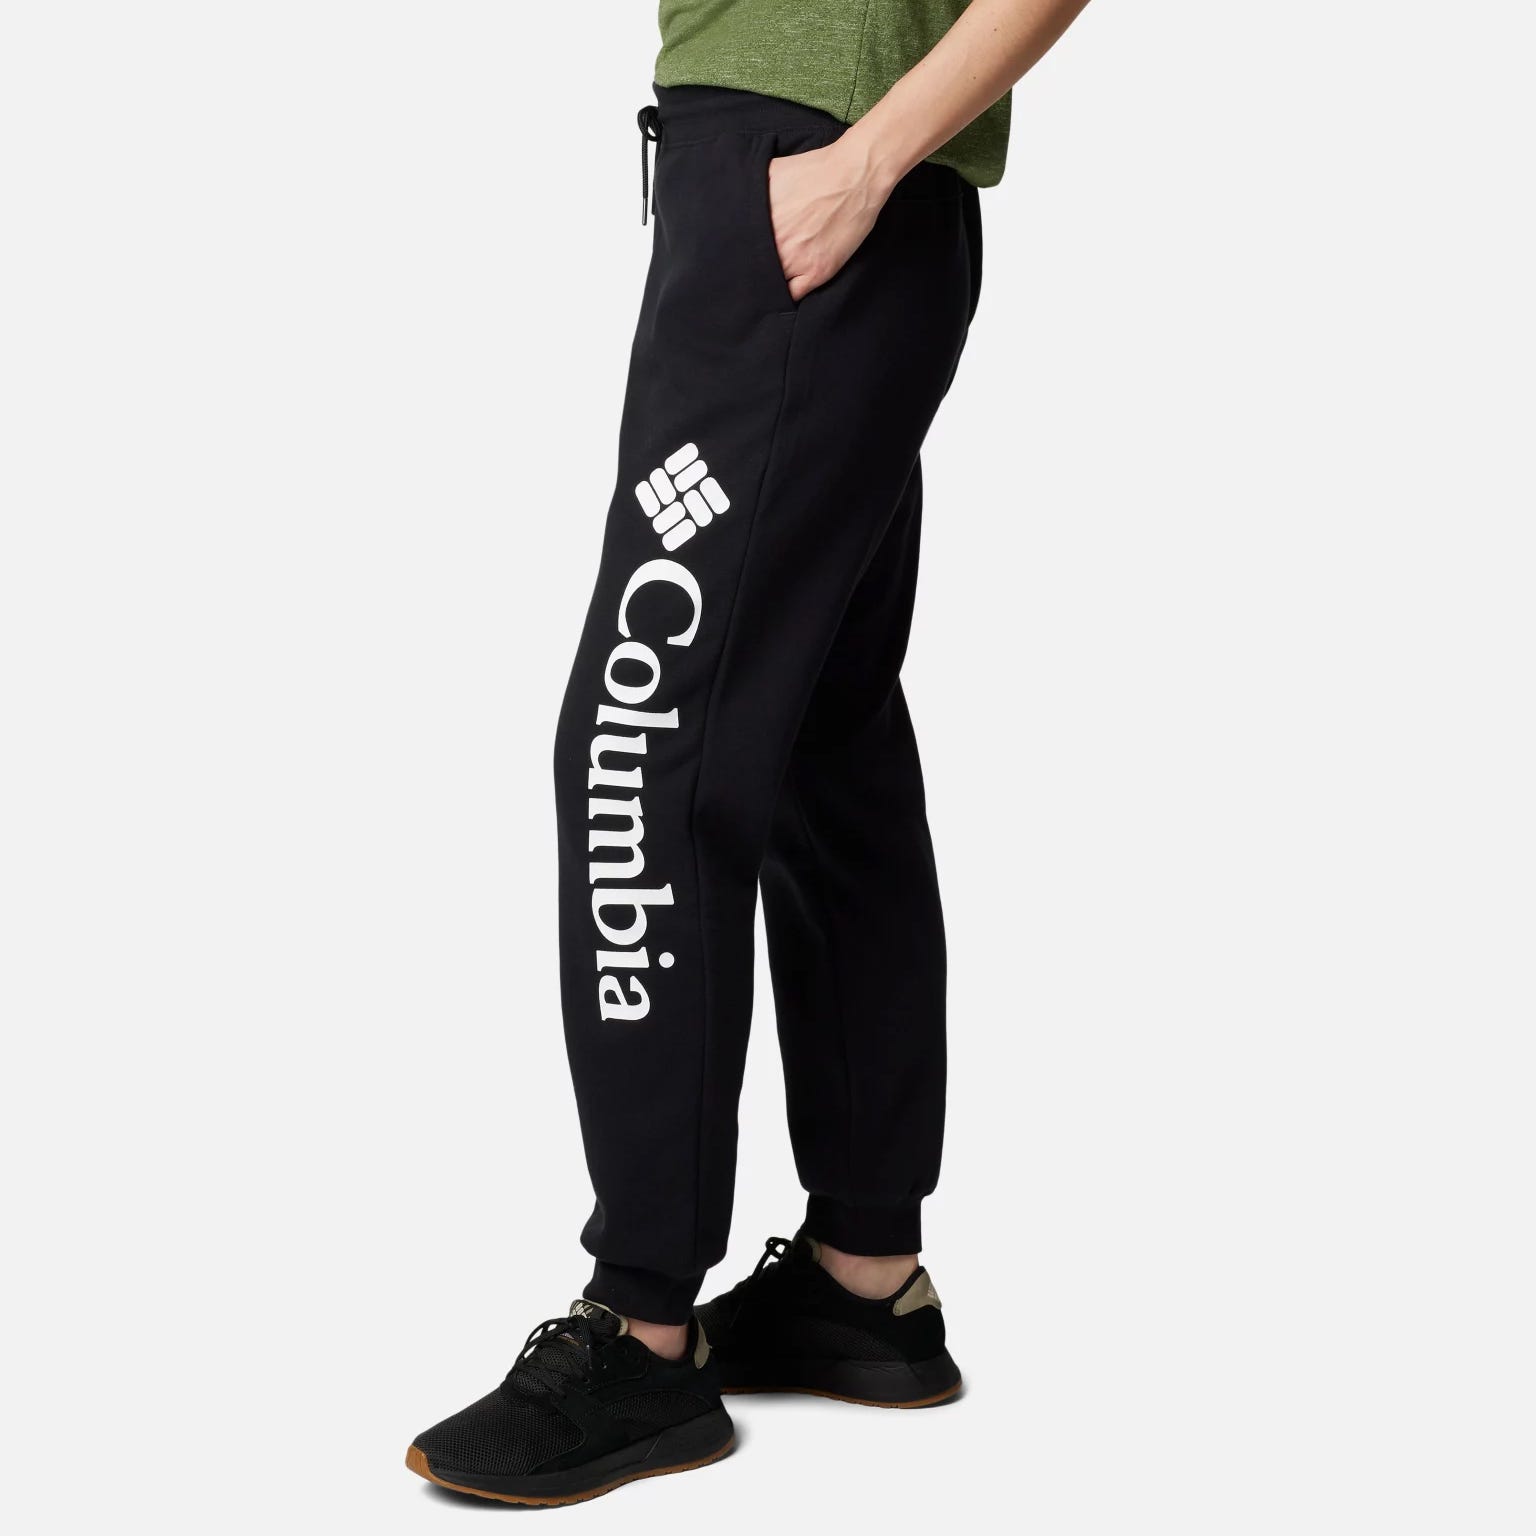 A person is wearing dark pants with the Columbia brand logo on the left leg and black sneakers.